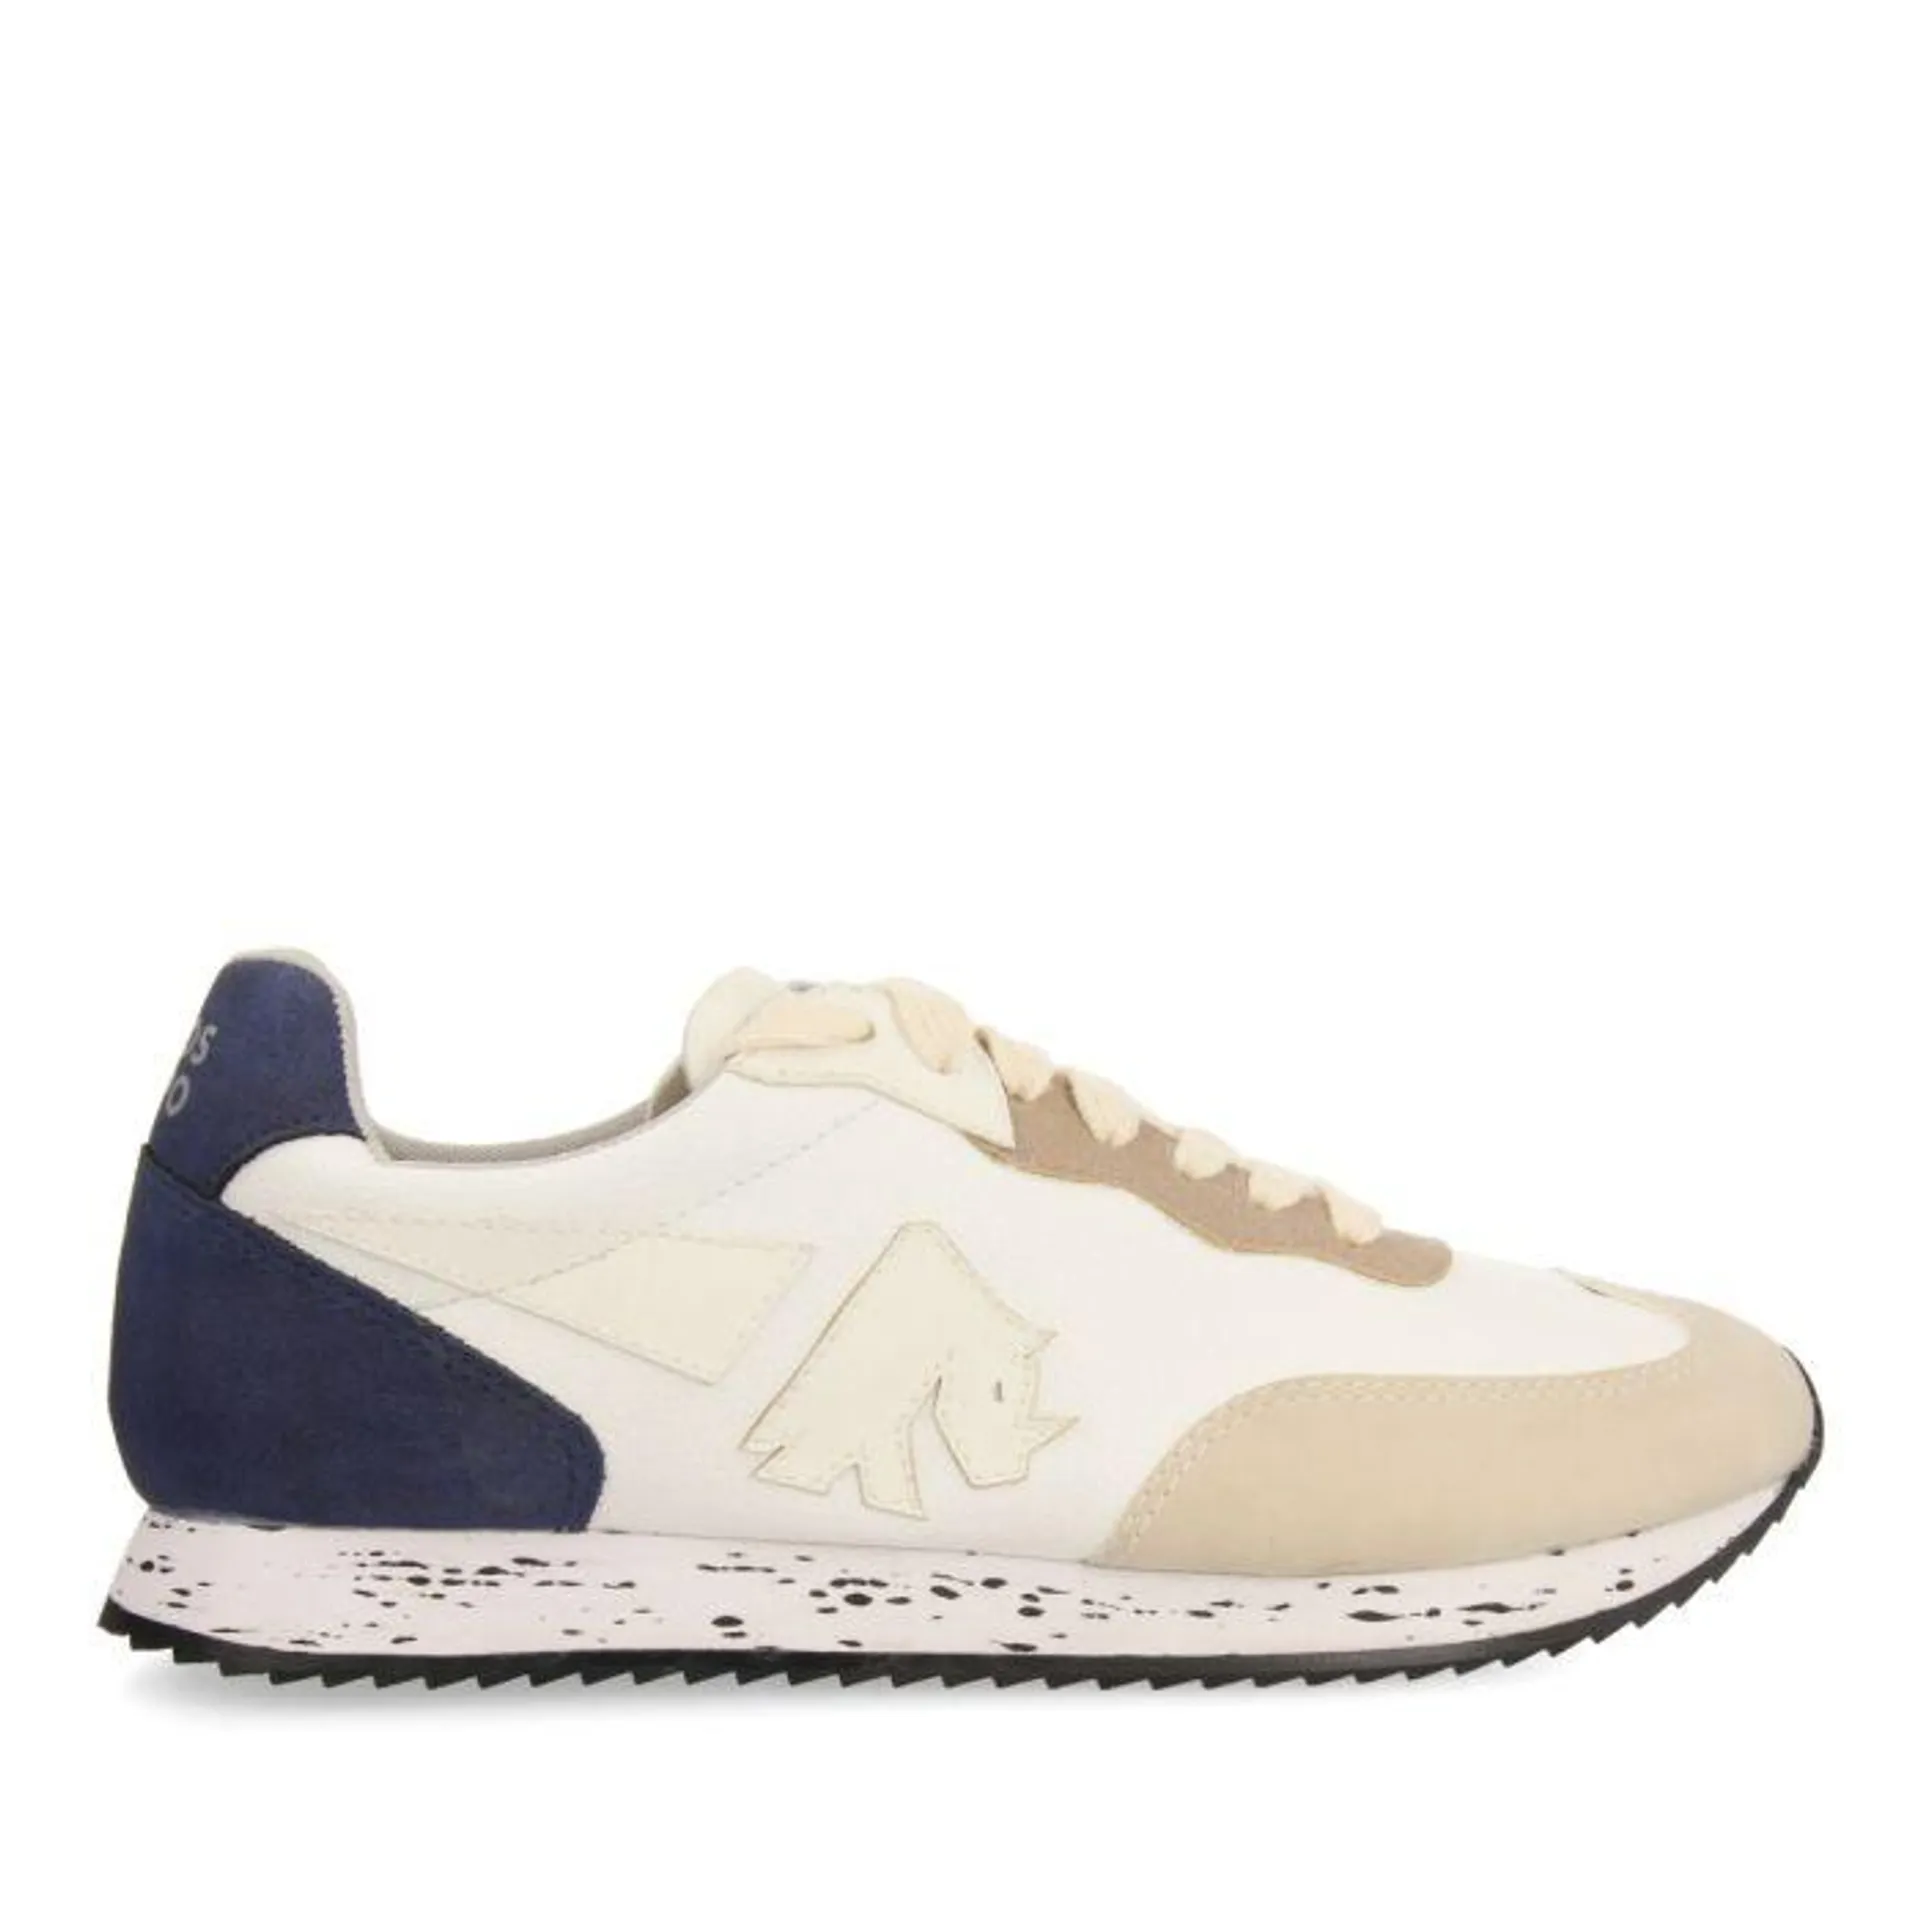 Vilnius men's white sneakers with grey and navy blue details